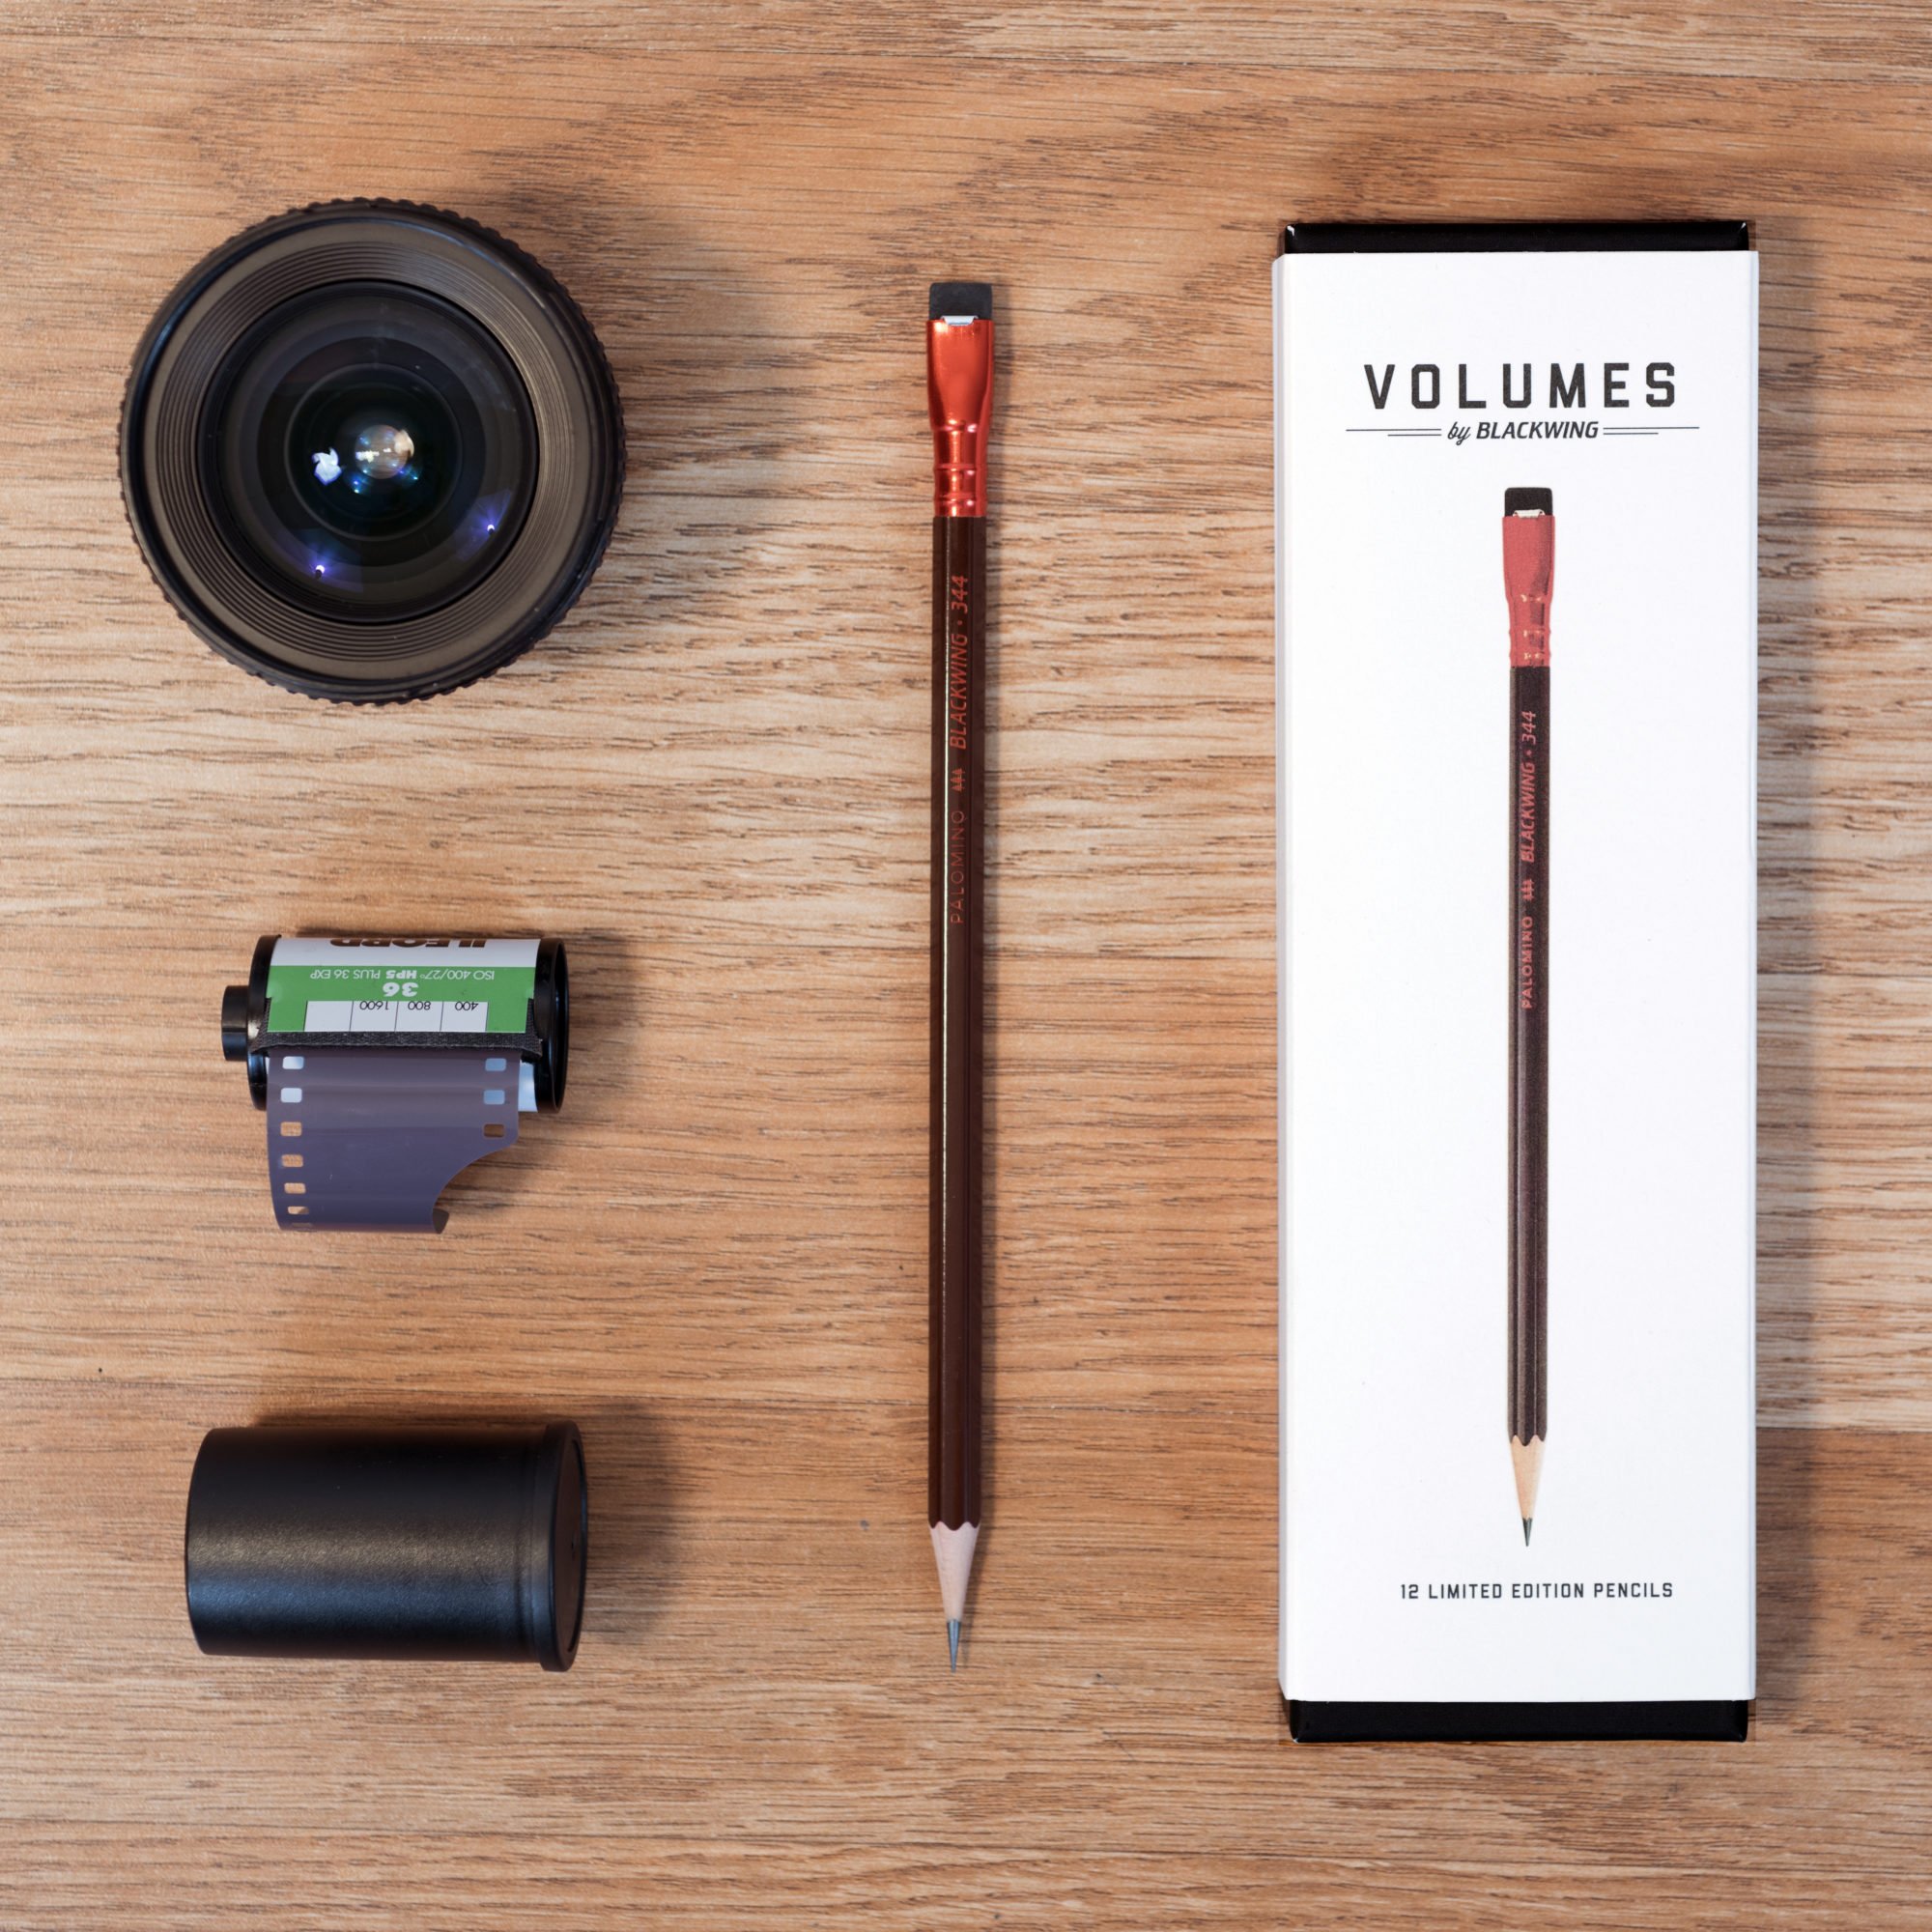 Volumes Firm Graphite 1 Blackwing 344 Pencil Deep Red Finish Palomino